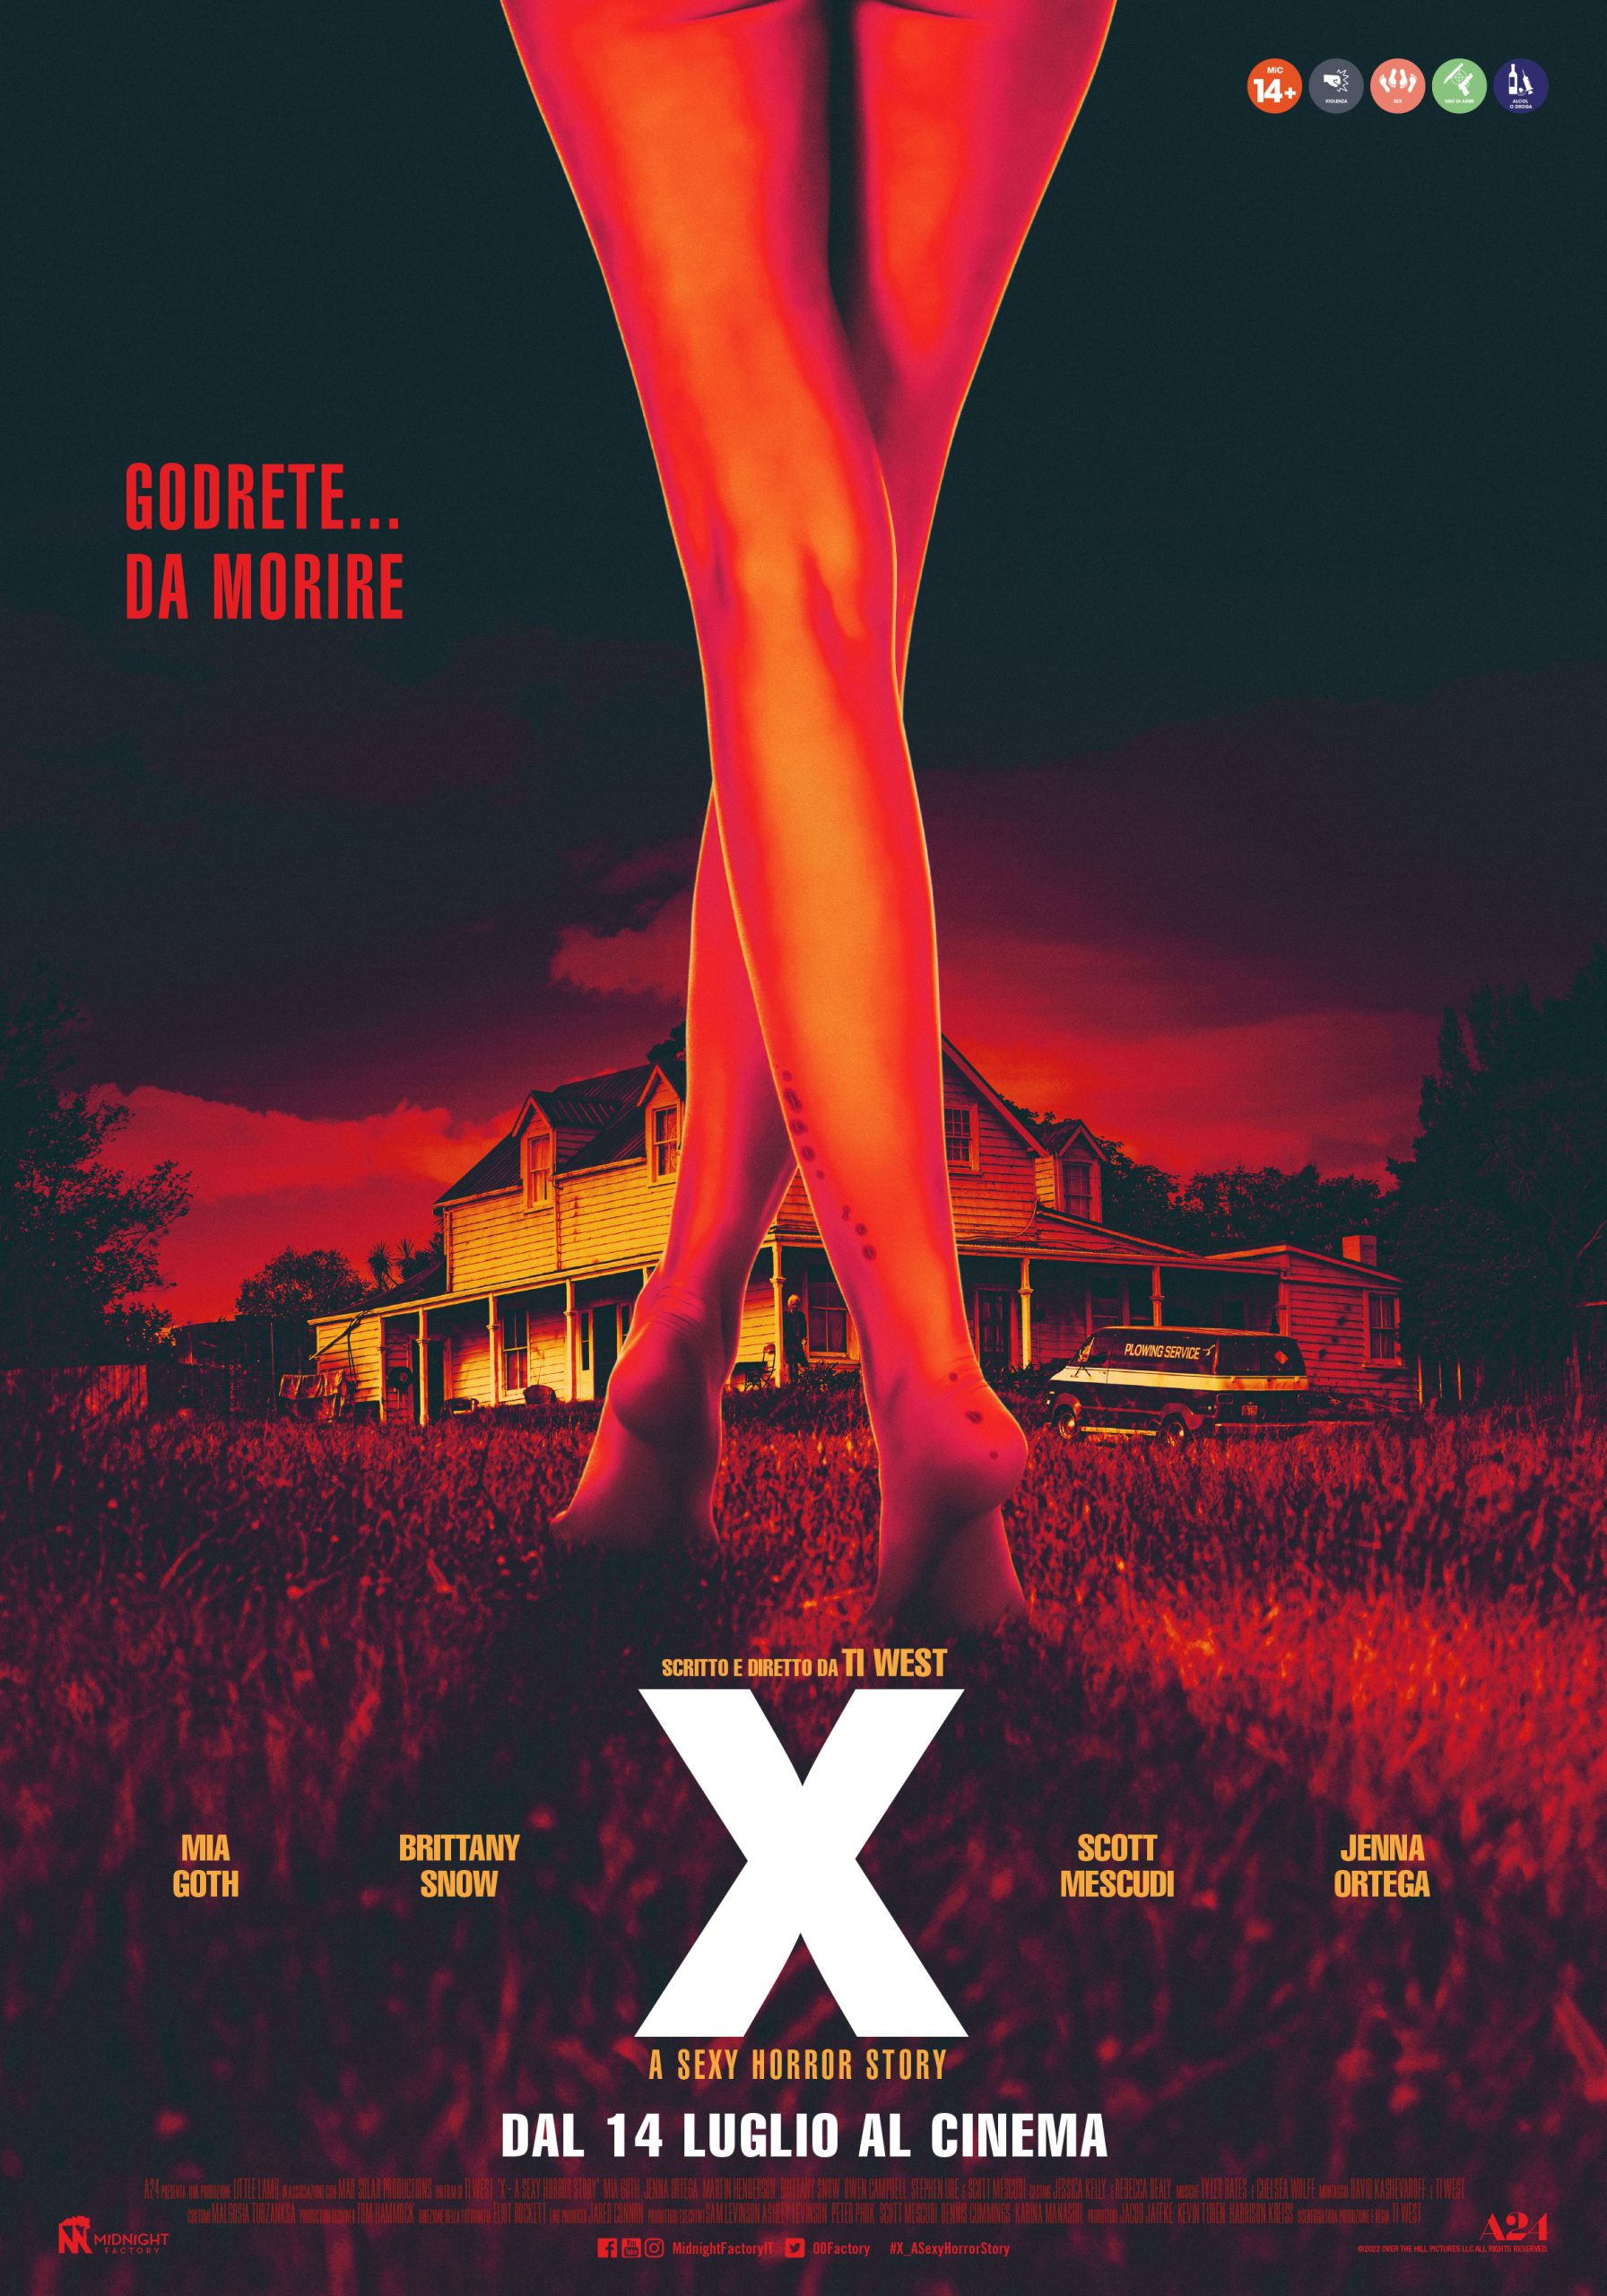 [RECENSIONE] X – A Sexy Horror Story